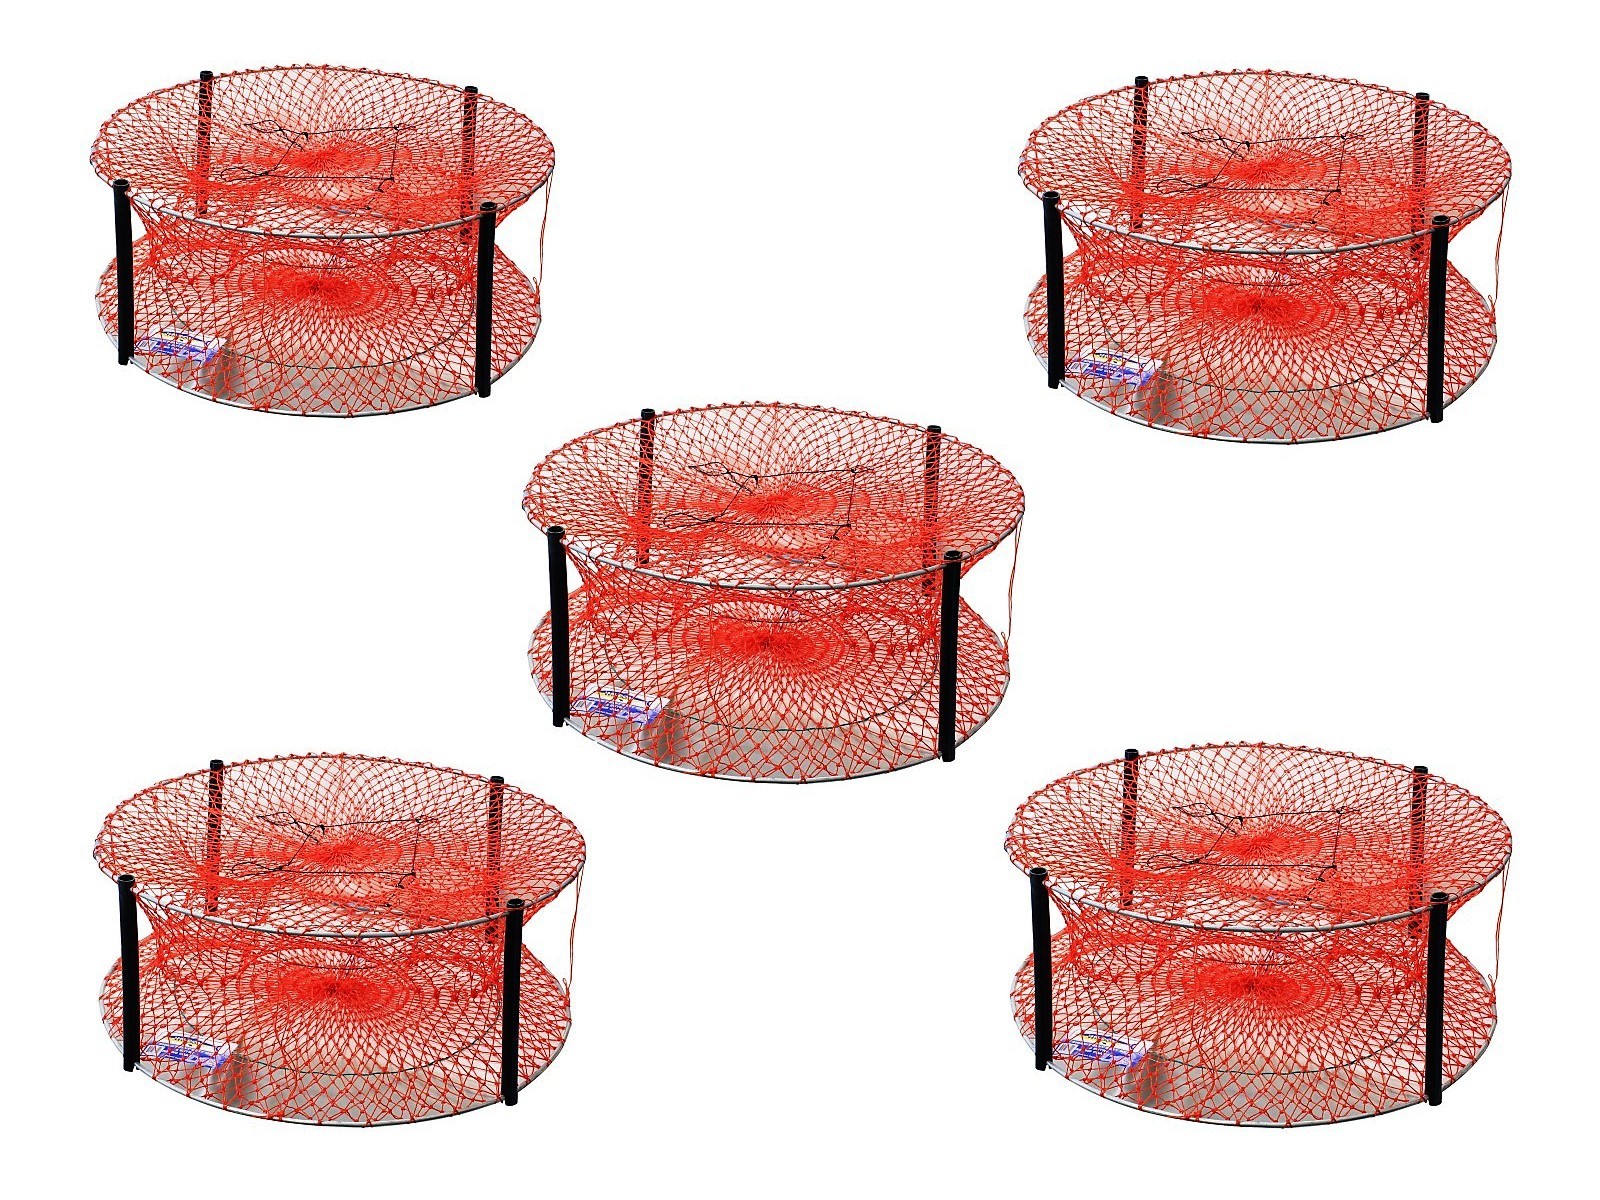 5 x Wilson Heavy Duty Round Crab Traps - Bulk Pack of 4 Entry Crab